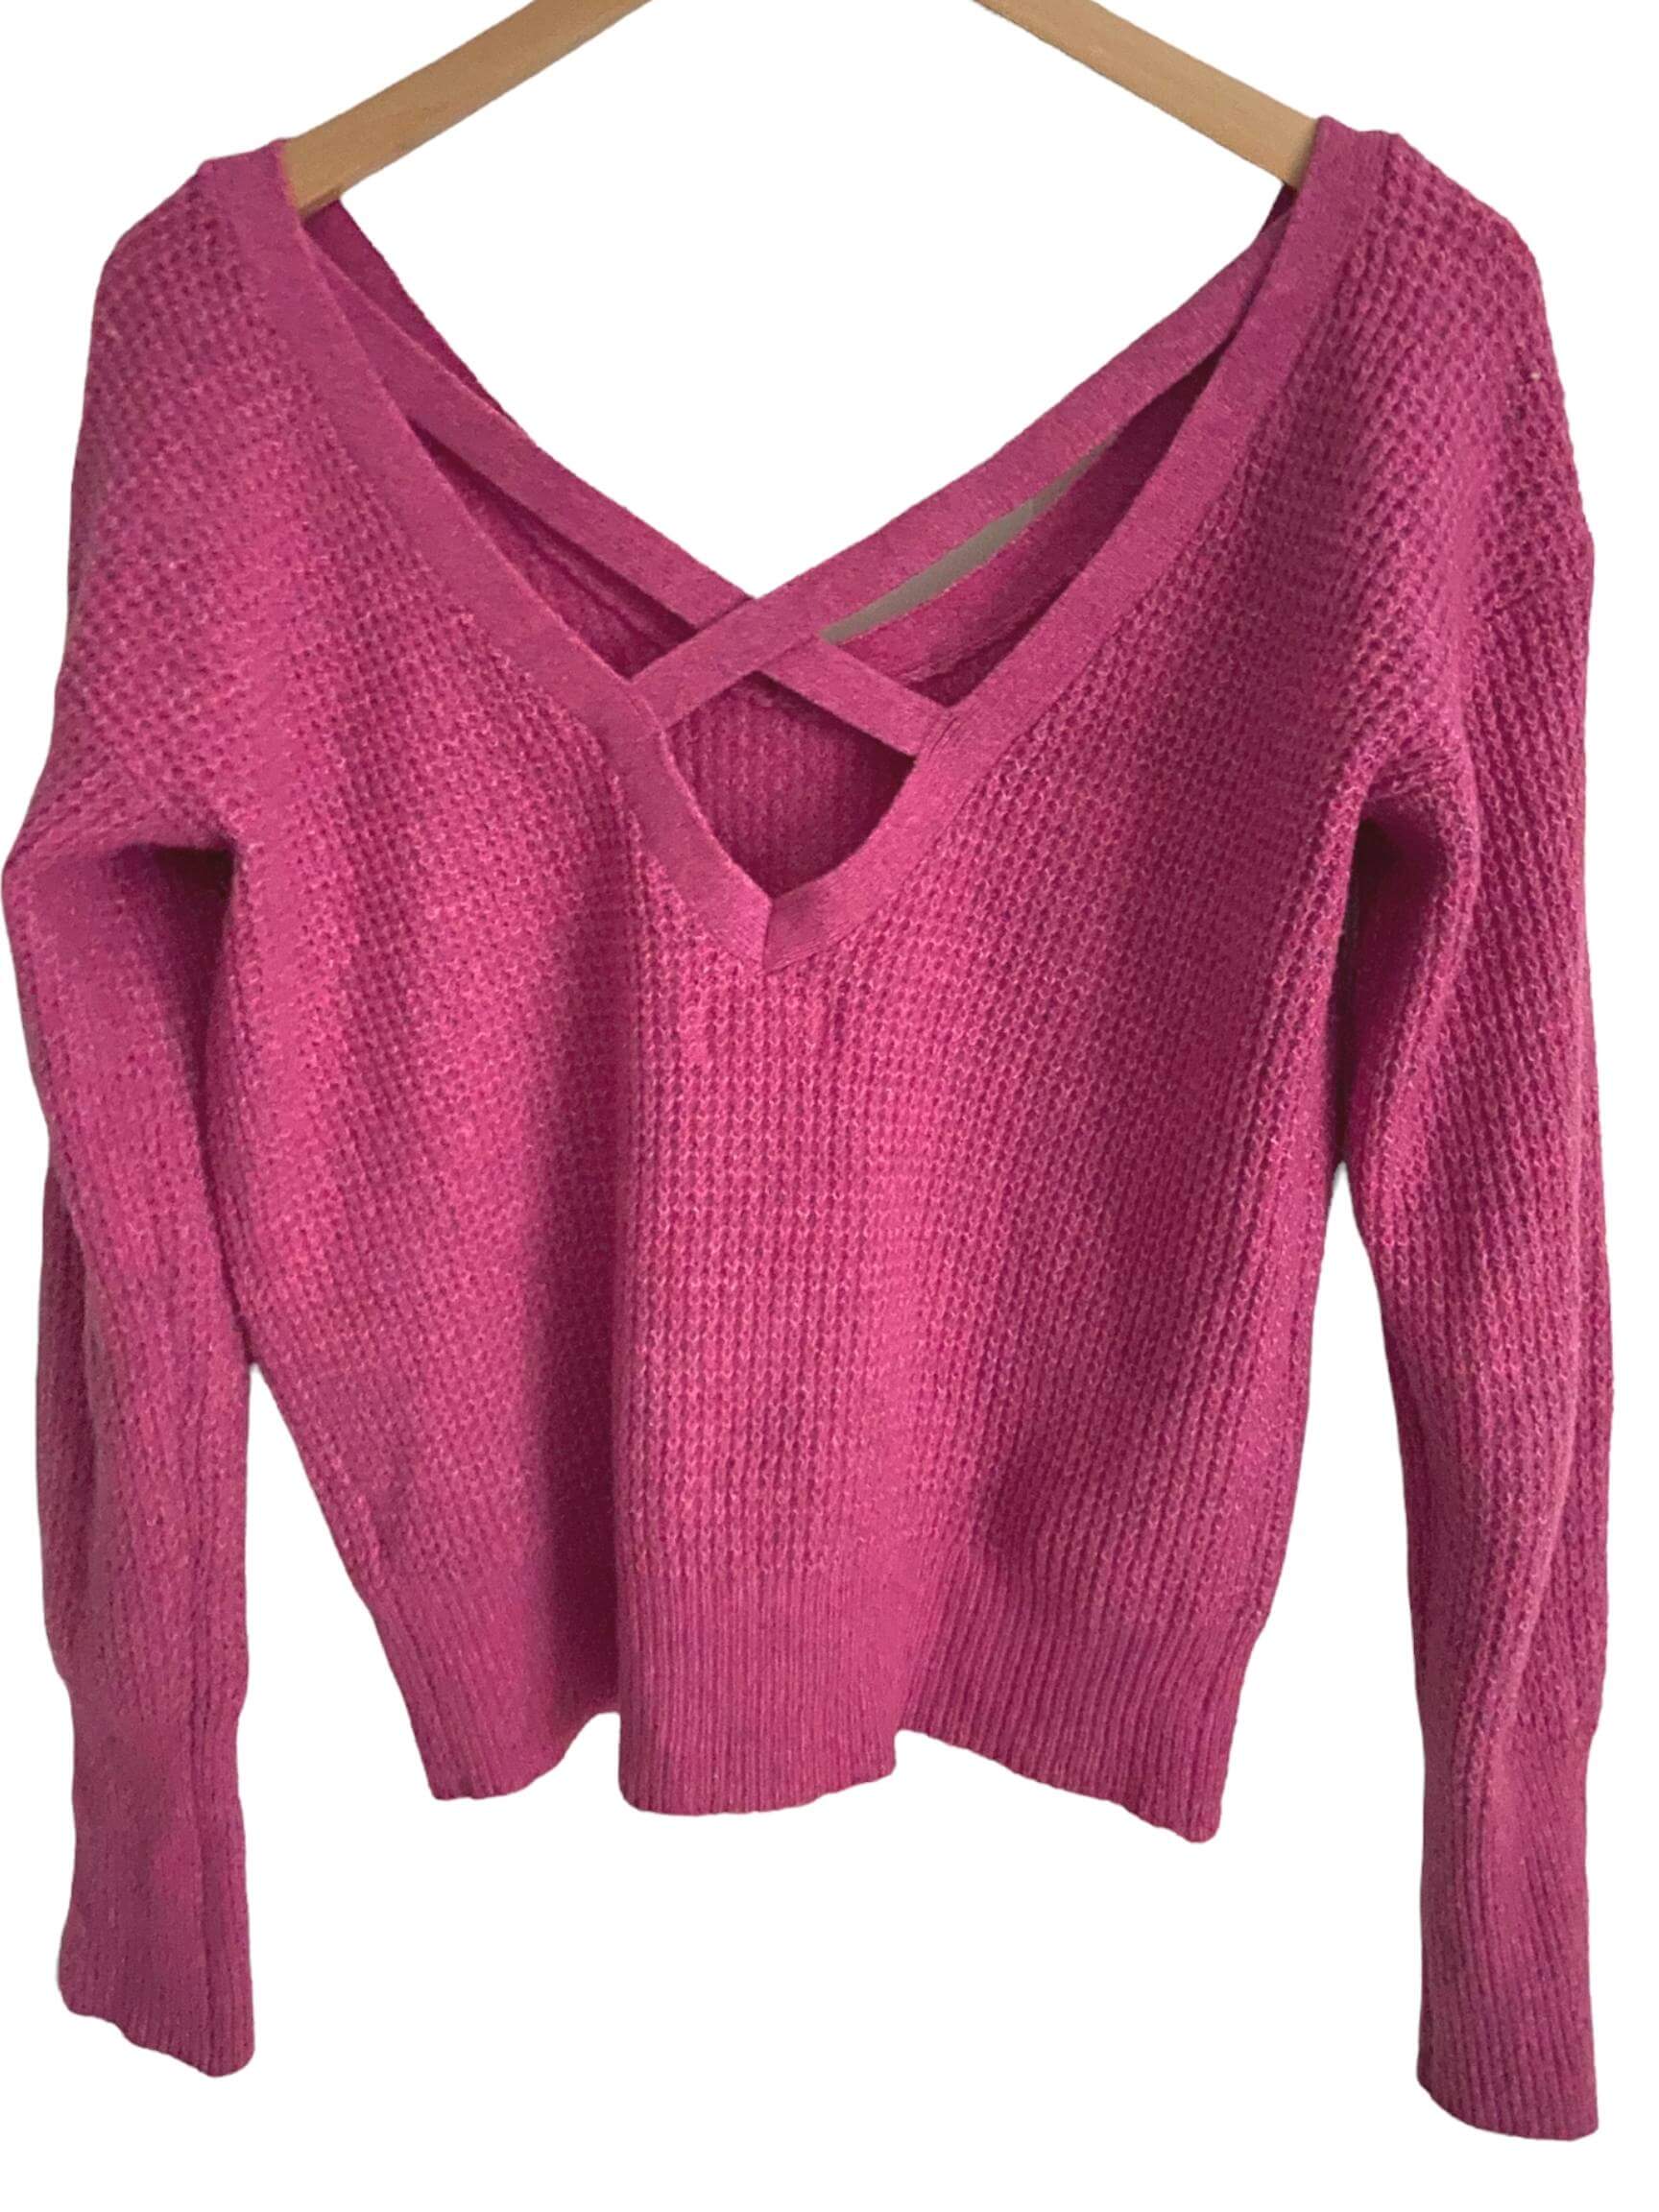 Cool Summer MAEVE pink cross back sweater